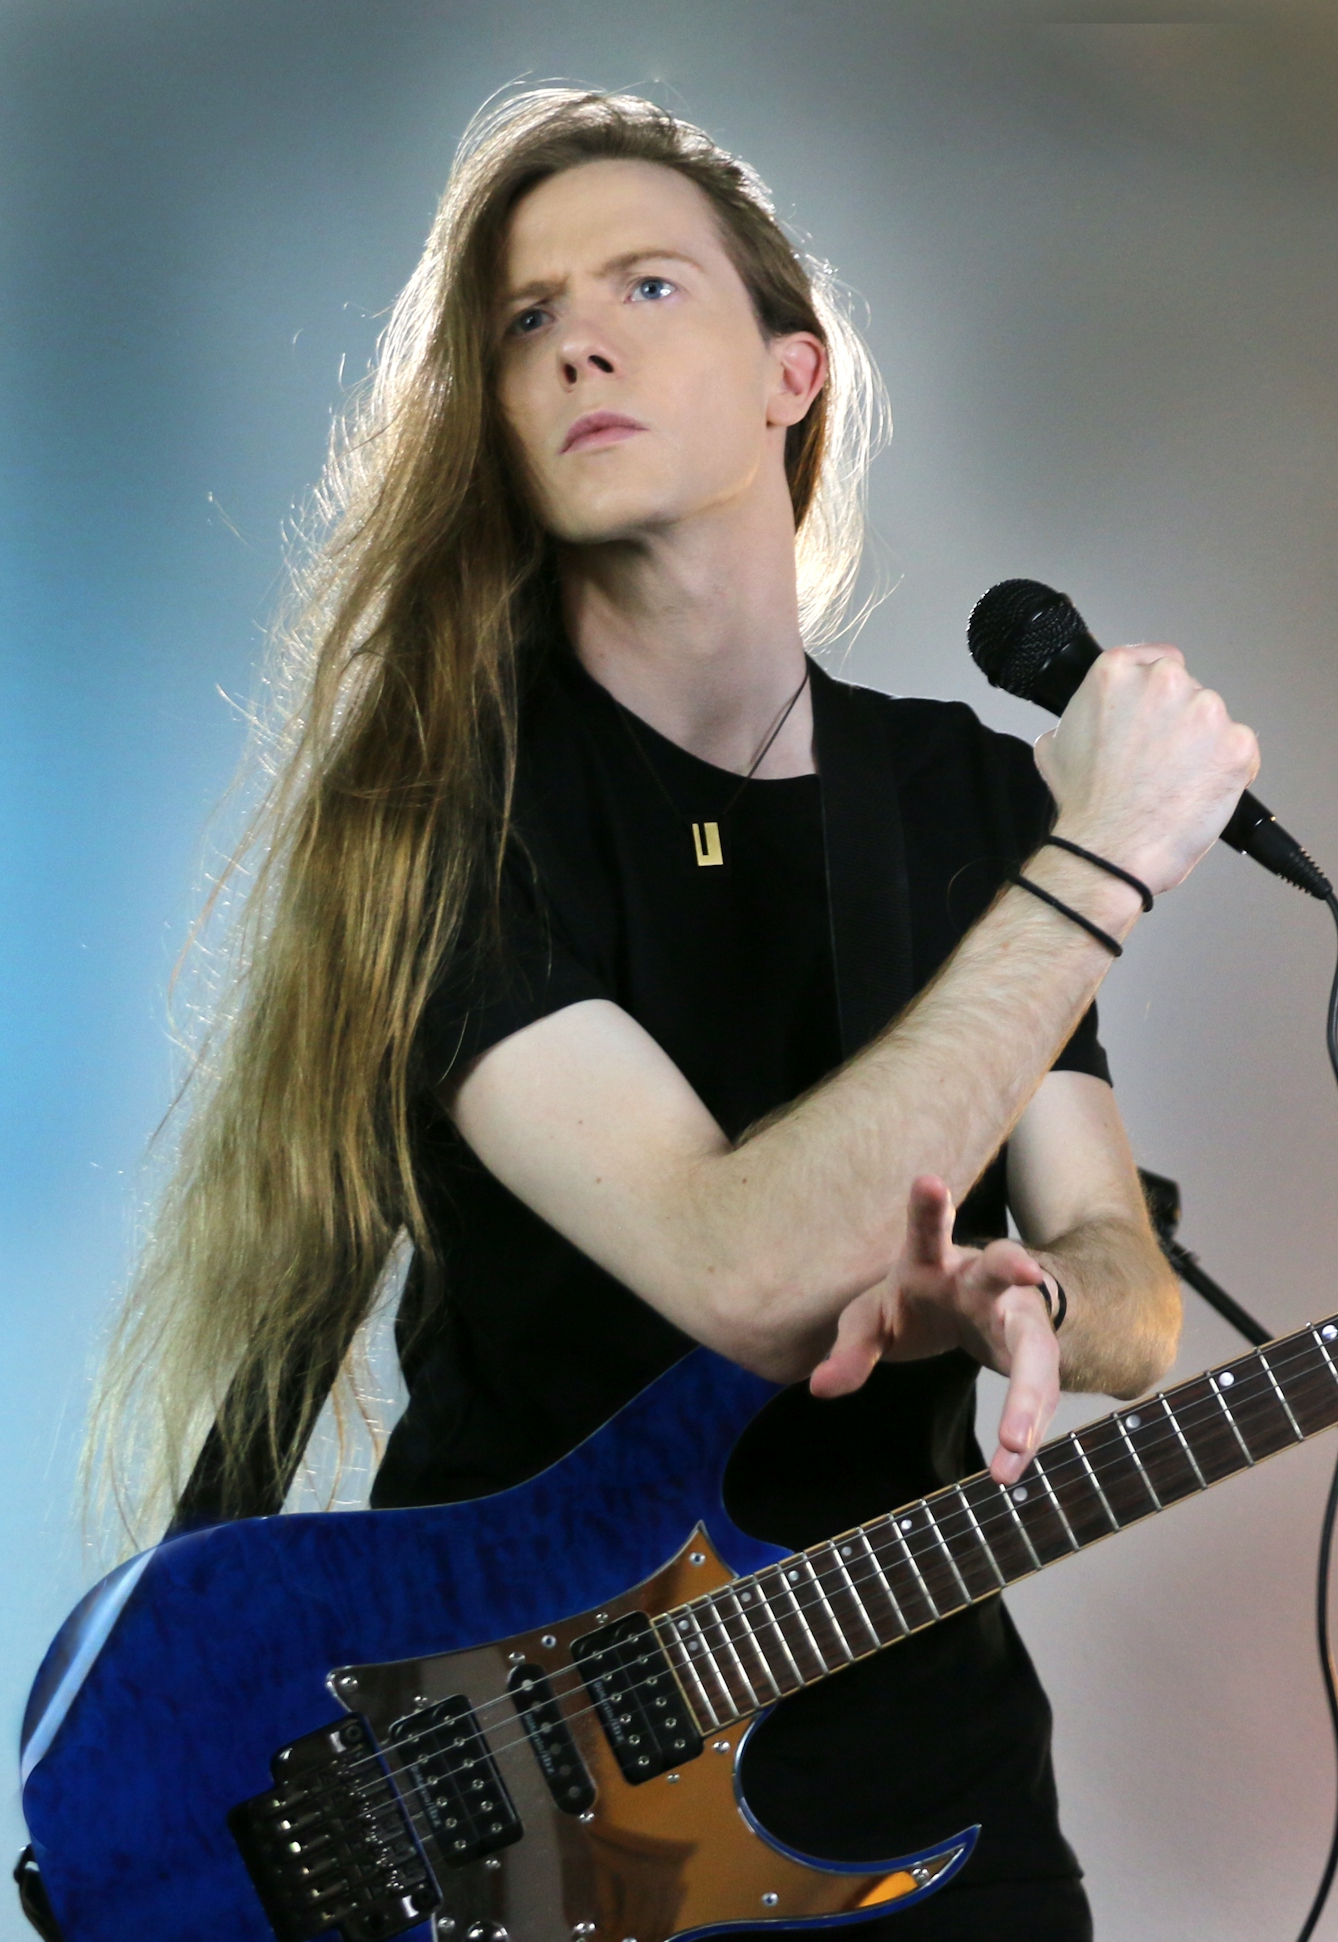 Photo of man with long hair holding a microphone and a guitar.